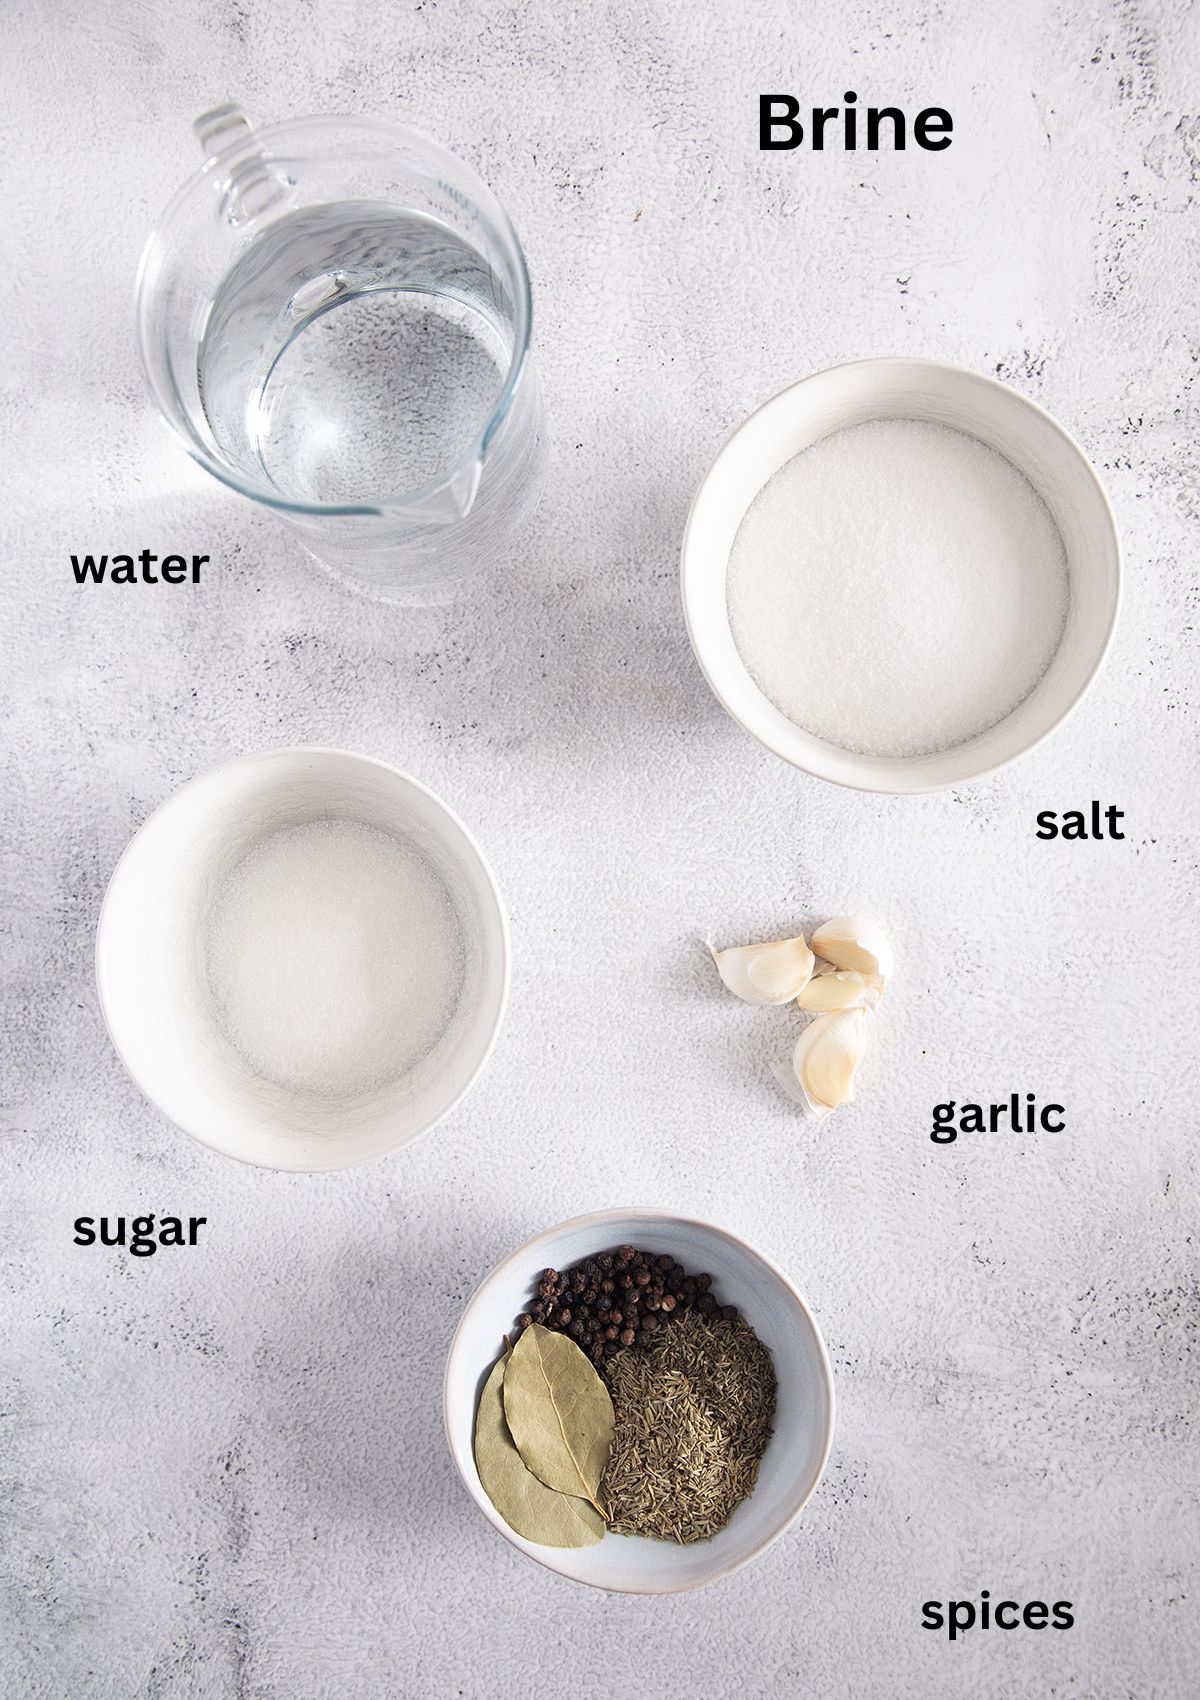 water, salt,sugar, spices and garlic for making brine in bowls on the table.